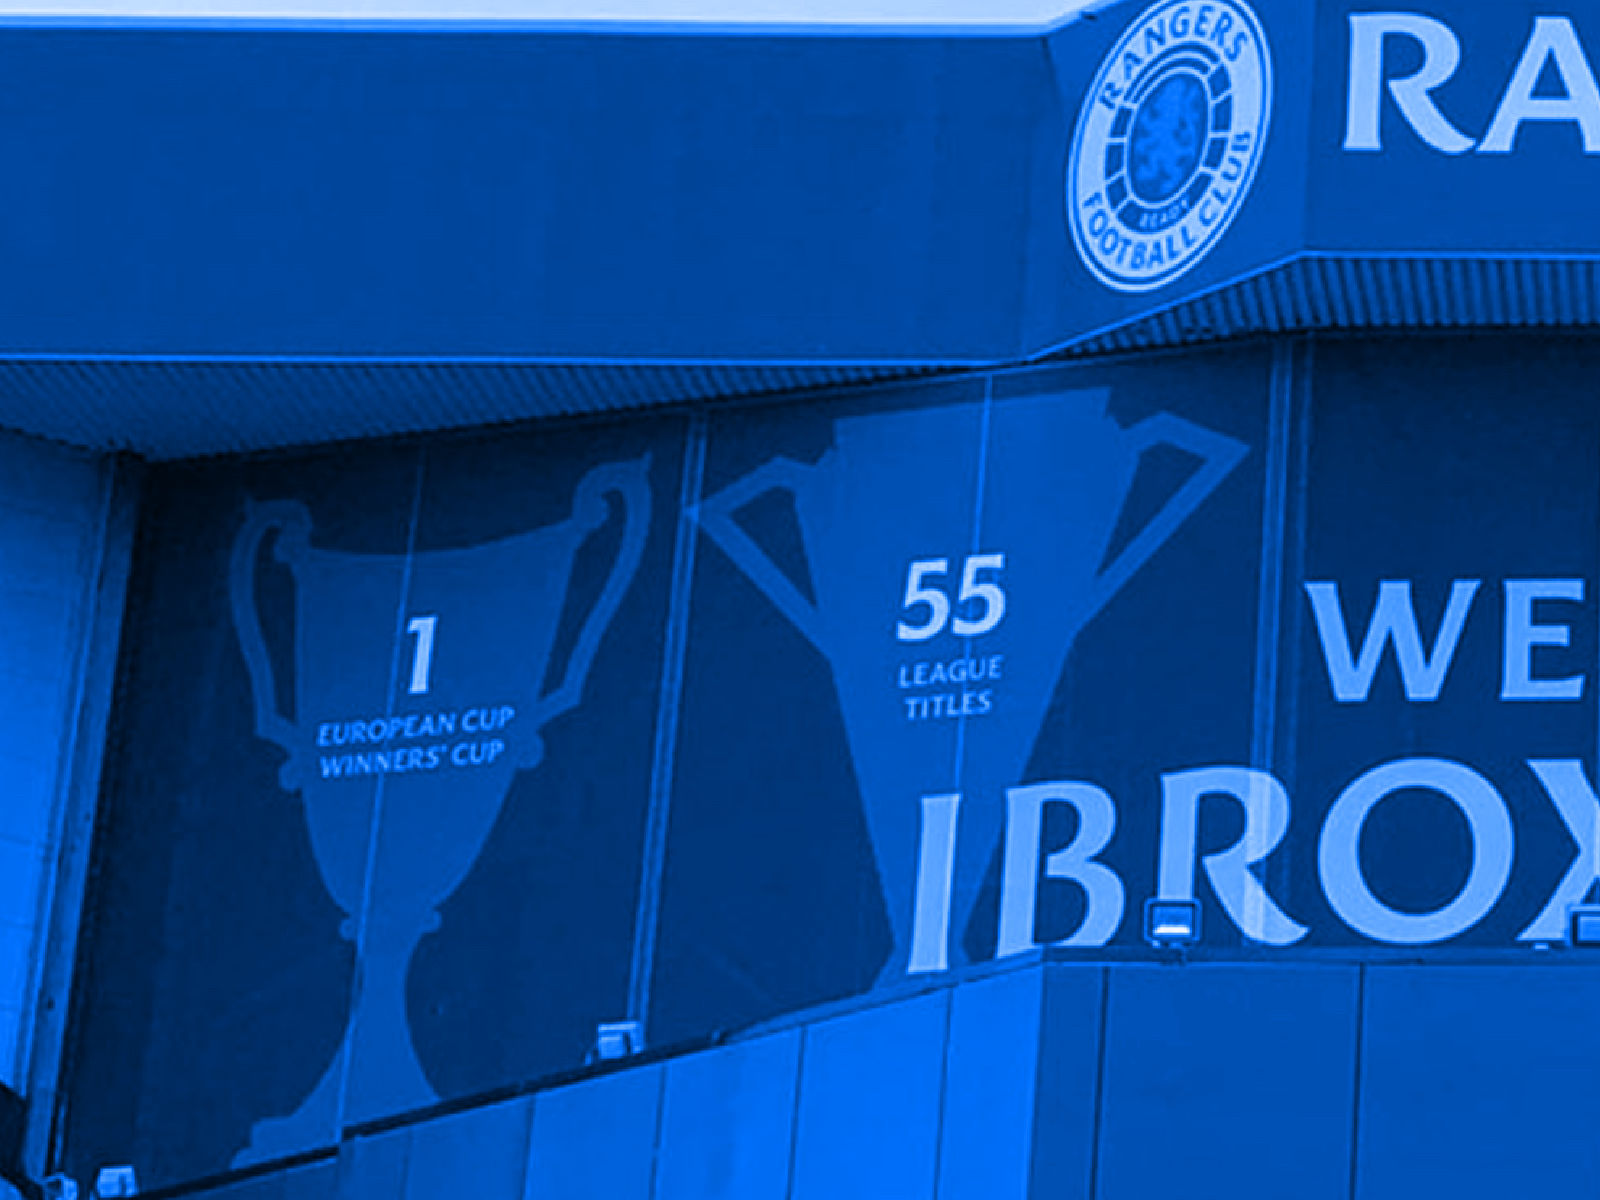 Fact Check: Know the real story behind ‘1 League Title’ Ibrox photo